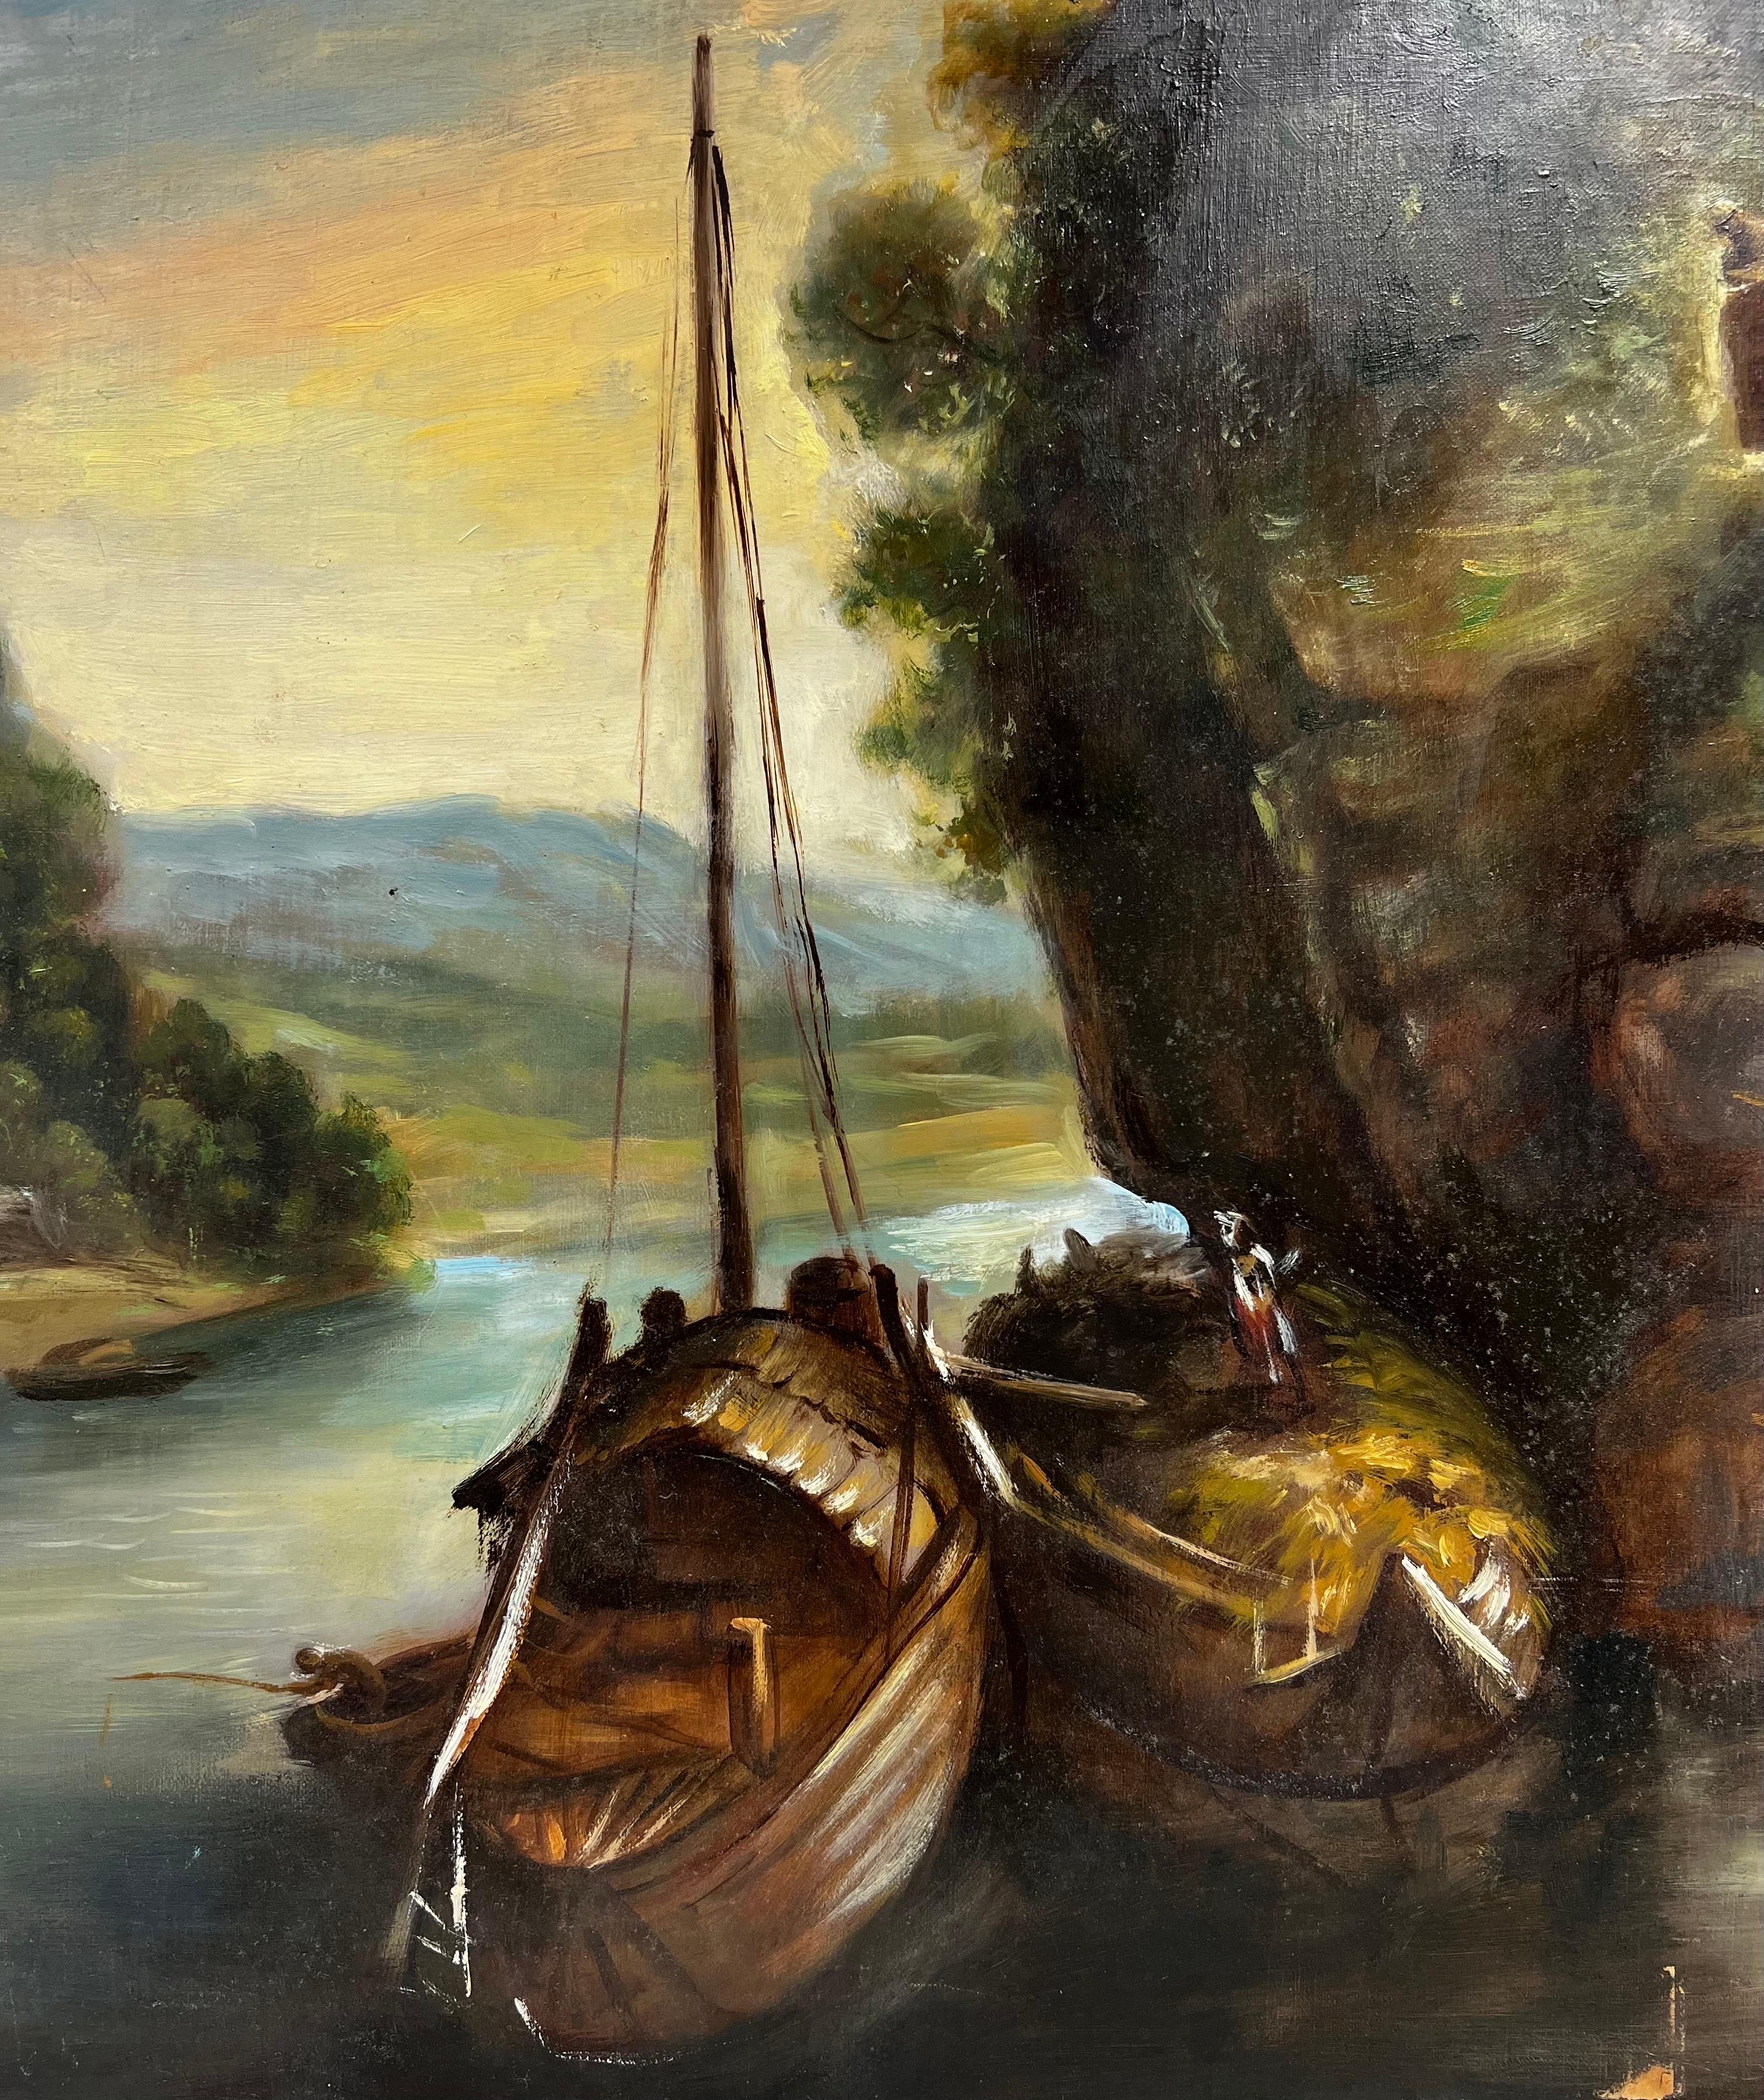 Artist/ School: French School, 20th century

Title: Riverside Boats

Medium: oil on canvas laid on board, unframed 

Canvas : 25 x 19 inches

Provenance: private collection, France

Condition: The painting is in overall sound condition though with a